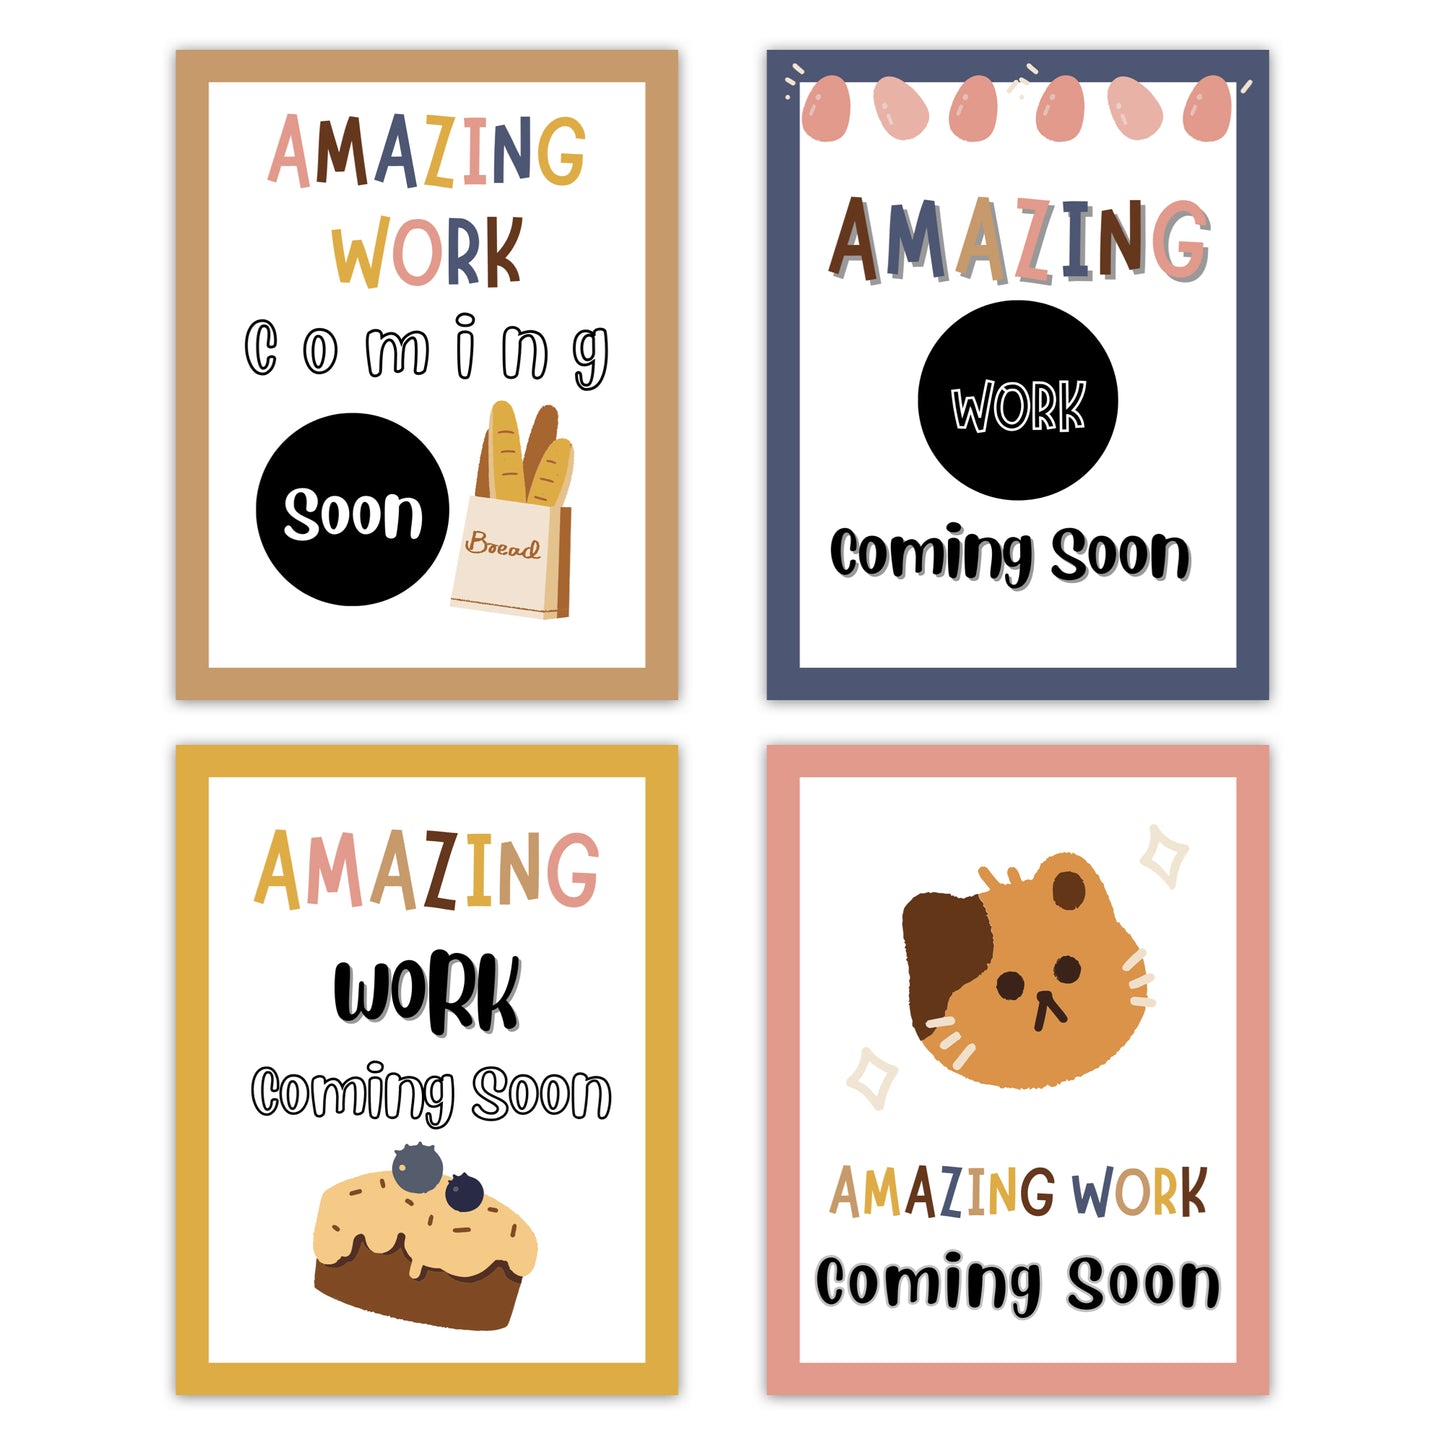 Amazing Work Coming Soon Posters - Brown Bakery Theme | Editable